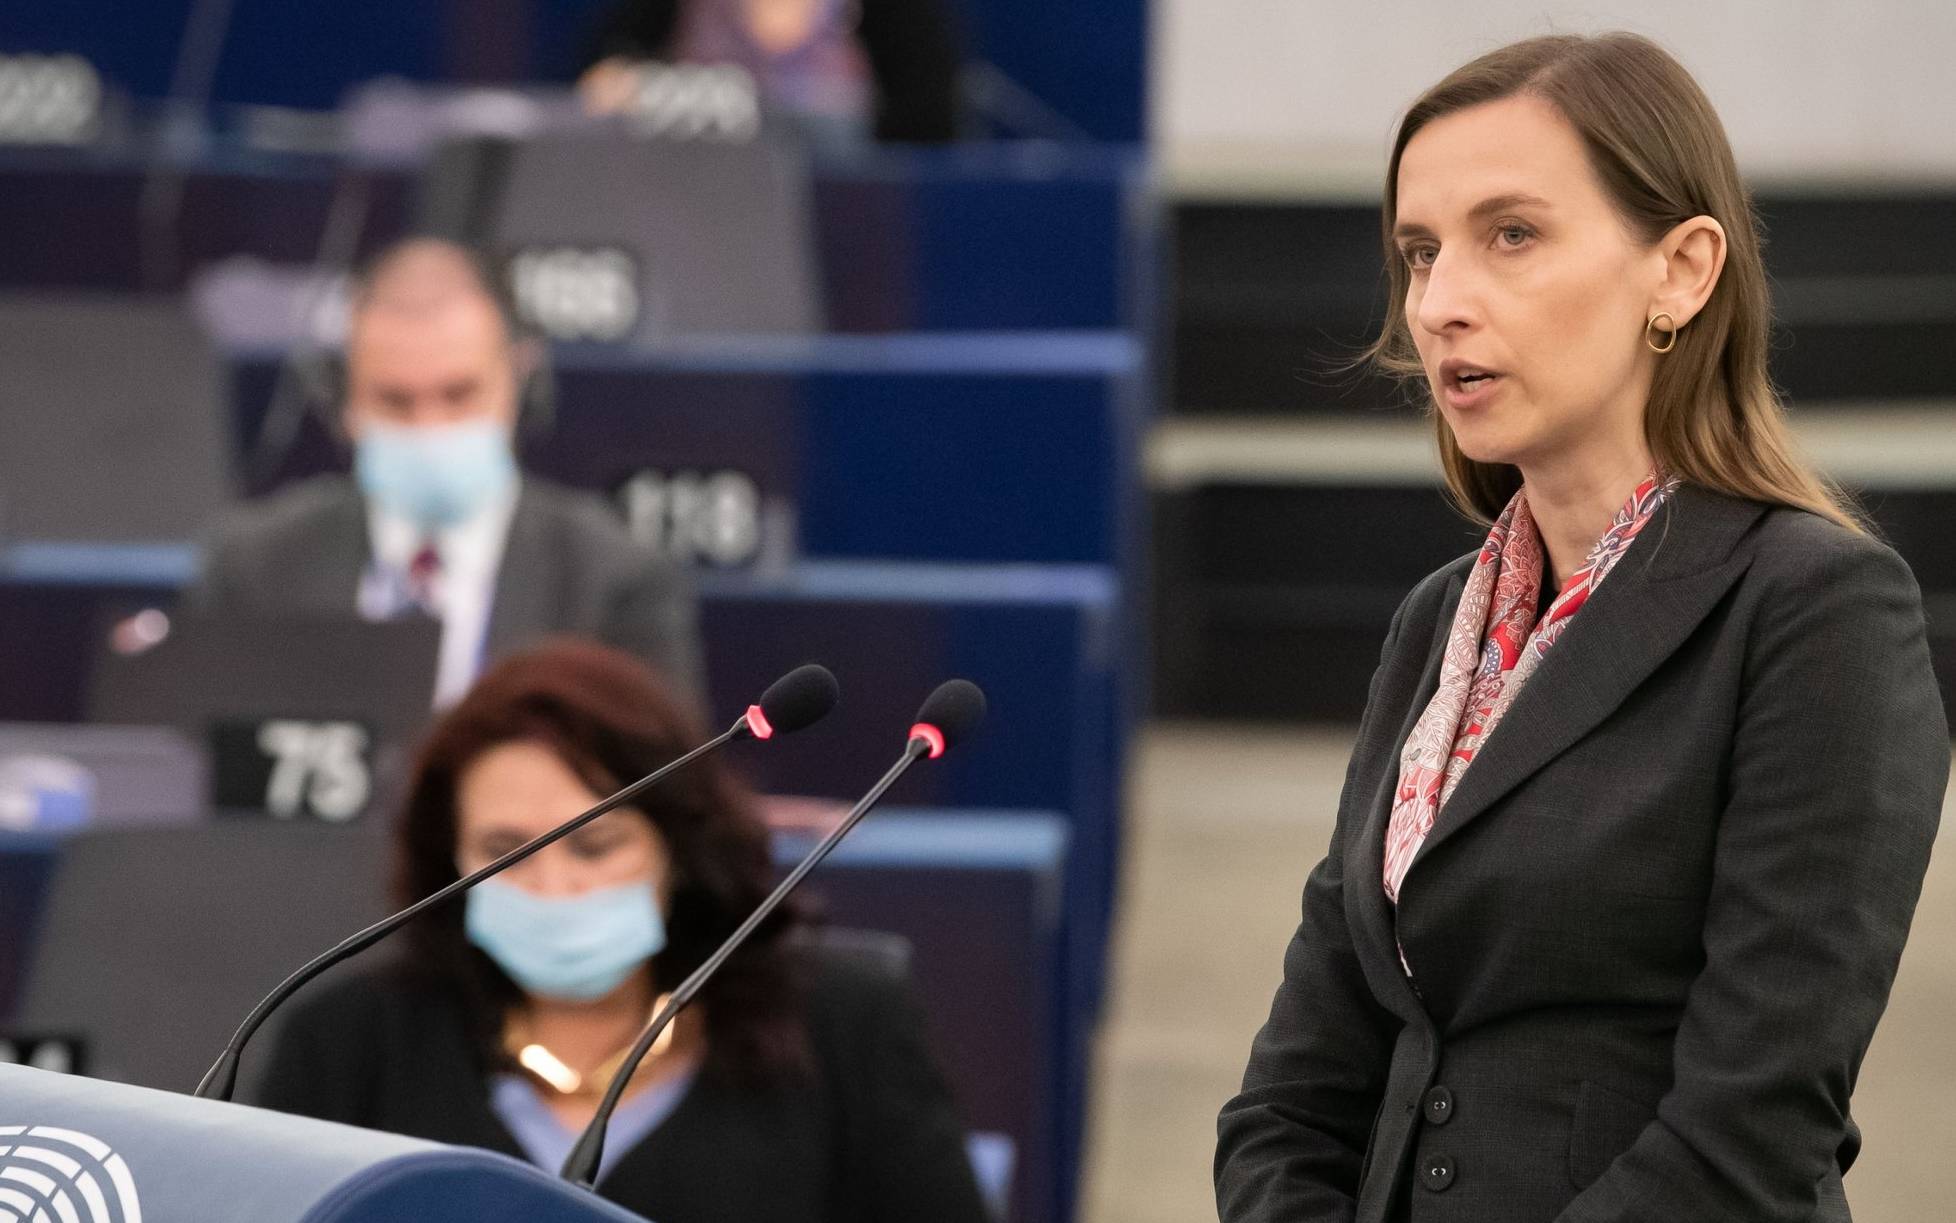 EP Plenary session - The first anniversary of the de facto abortion ban in Poland